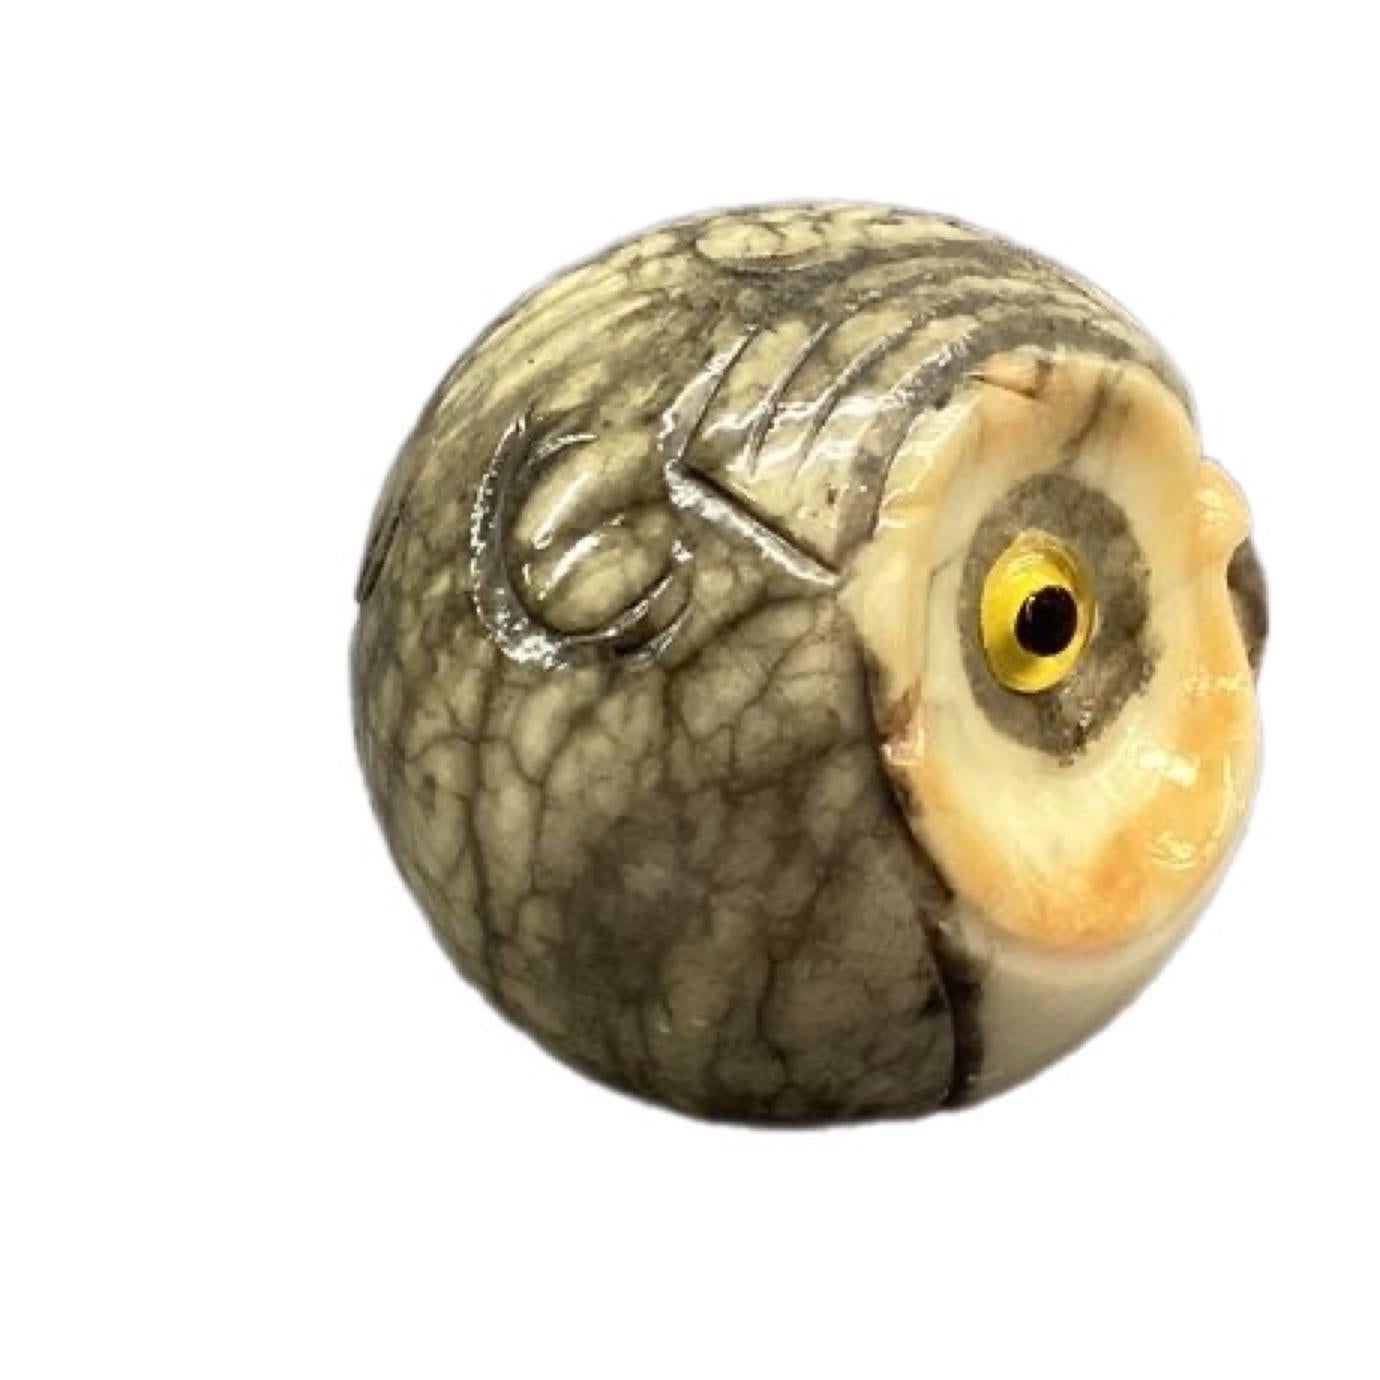 A fantastic mid-century Italian marble paperweight with yellow glass eyes. Carved beautifully. Measures 3” x 3”. Circa 1960’s